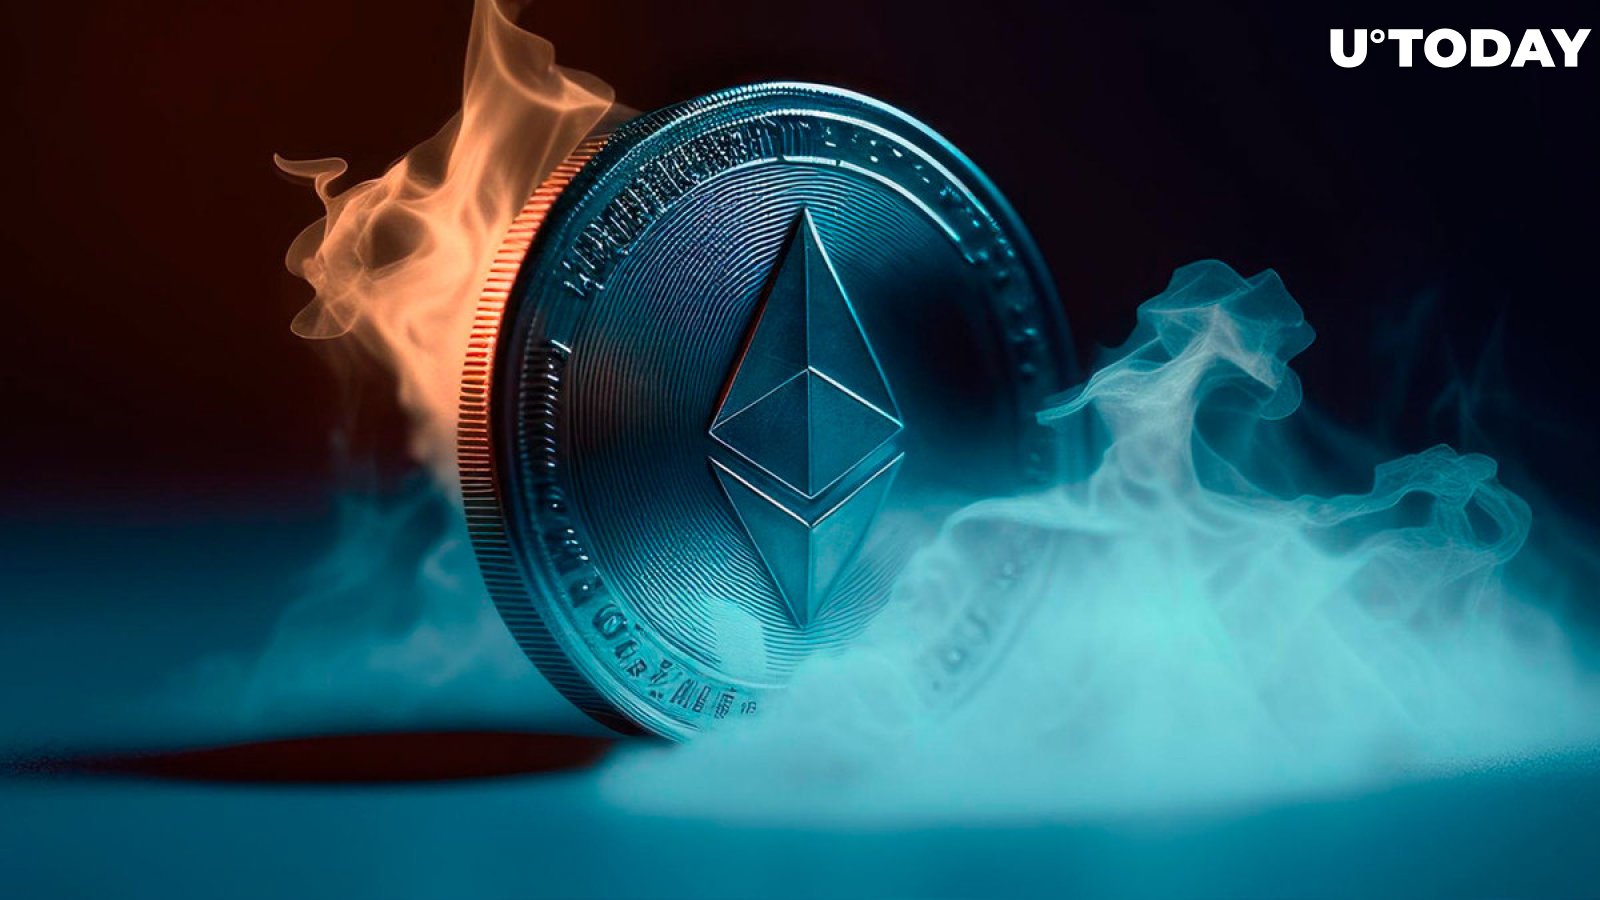 Former pre-mined Ethereum address suddenly activated as ETH price crashed 